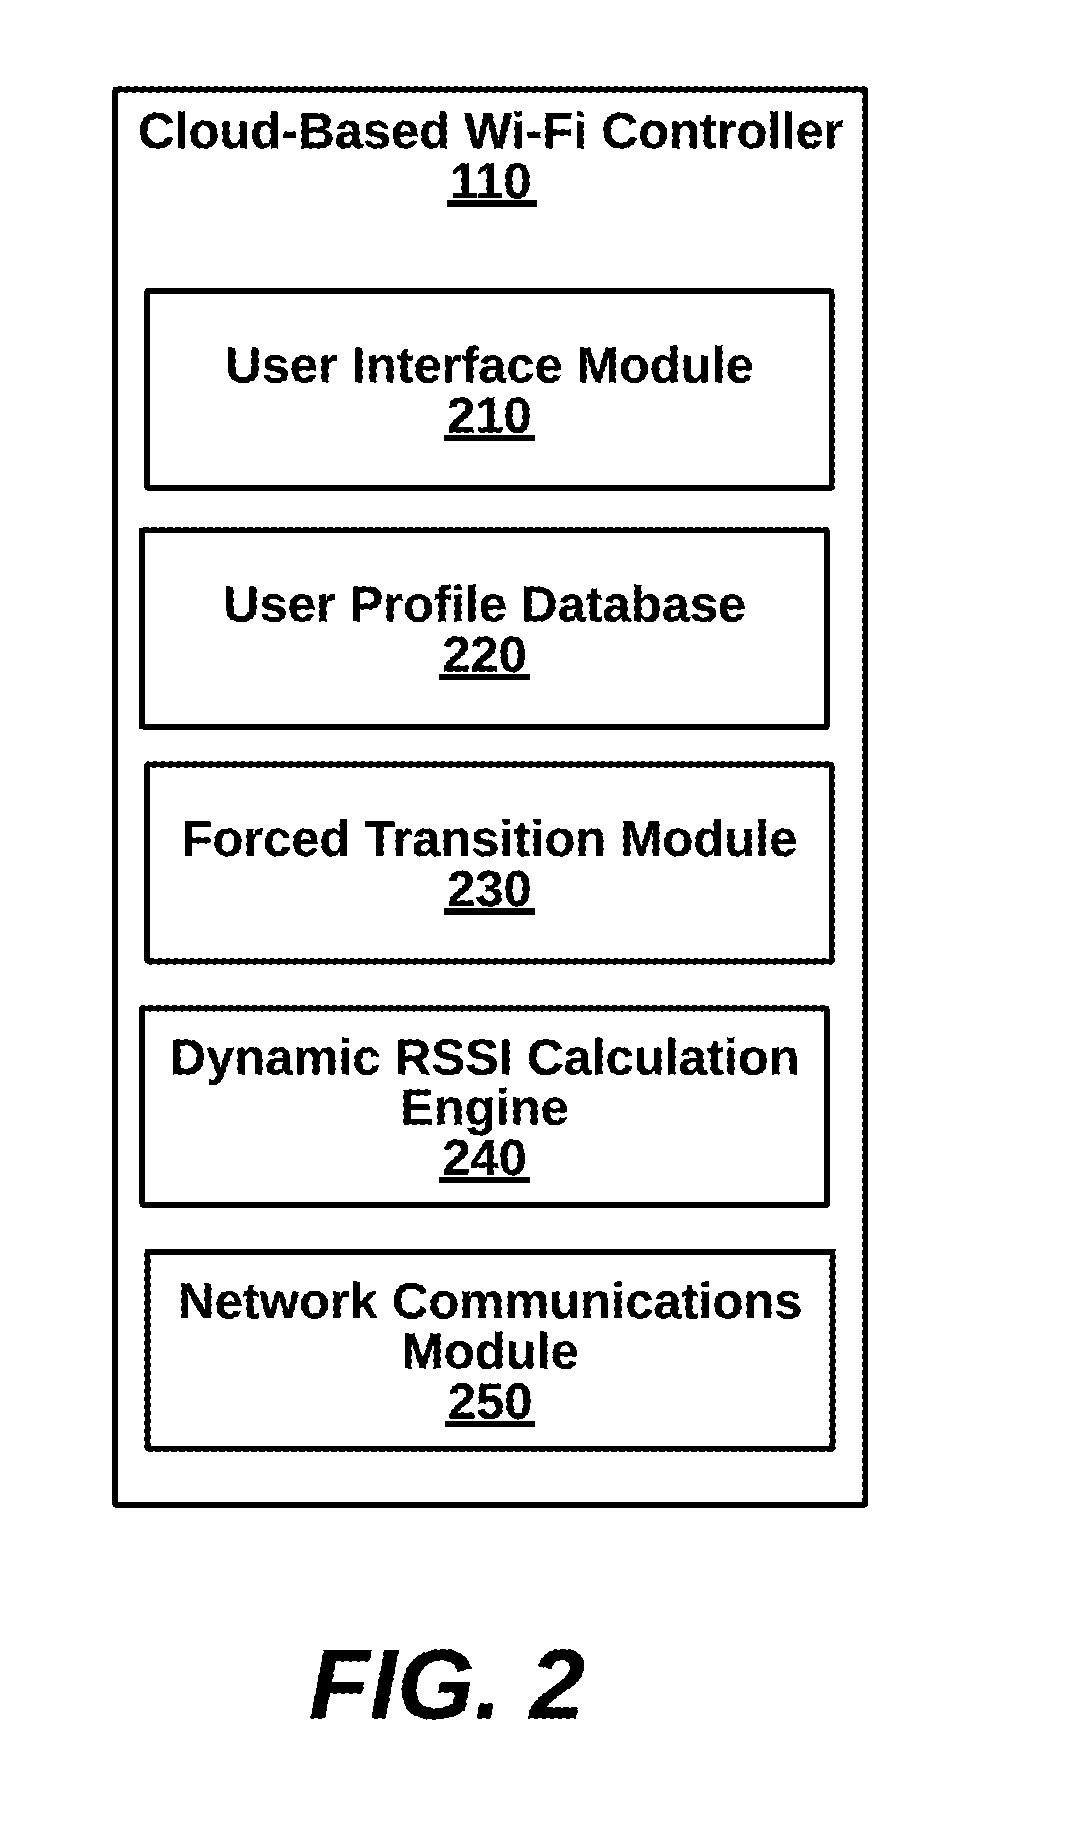 Controlling transitions between access points with dynamic RSSI (received signal strength indicator) thresholds for sticky-client stations of cloud-controlled wi-fi networks